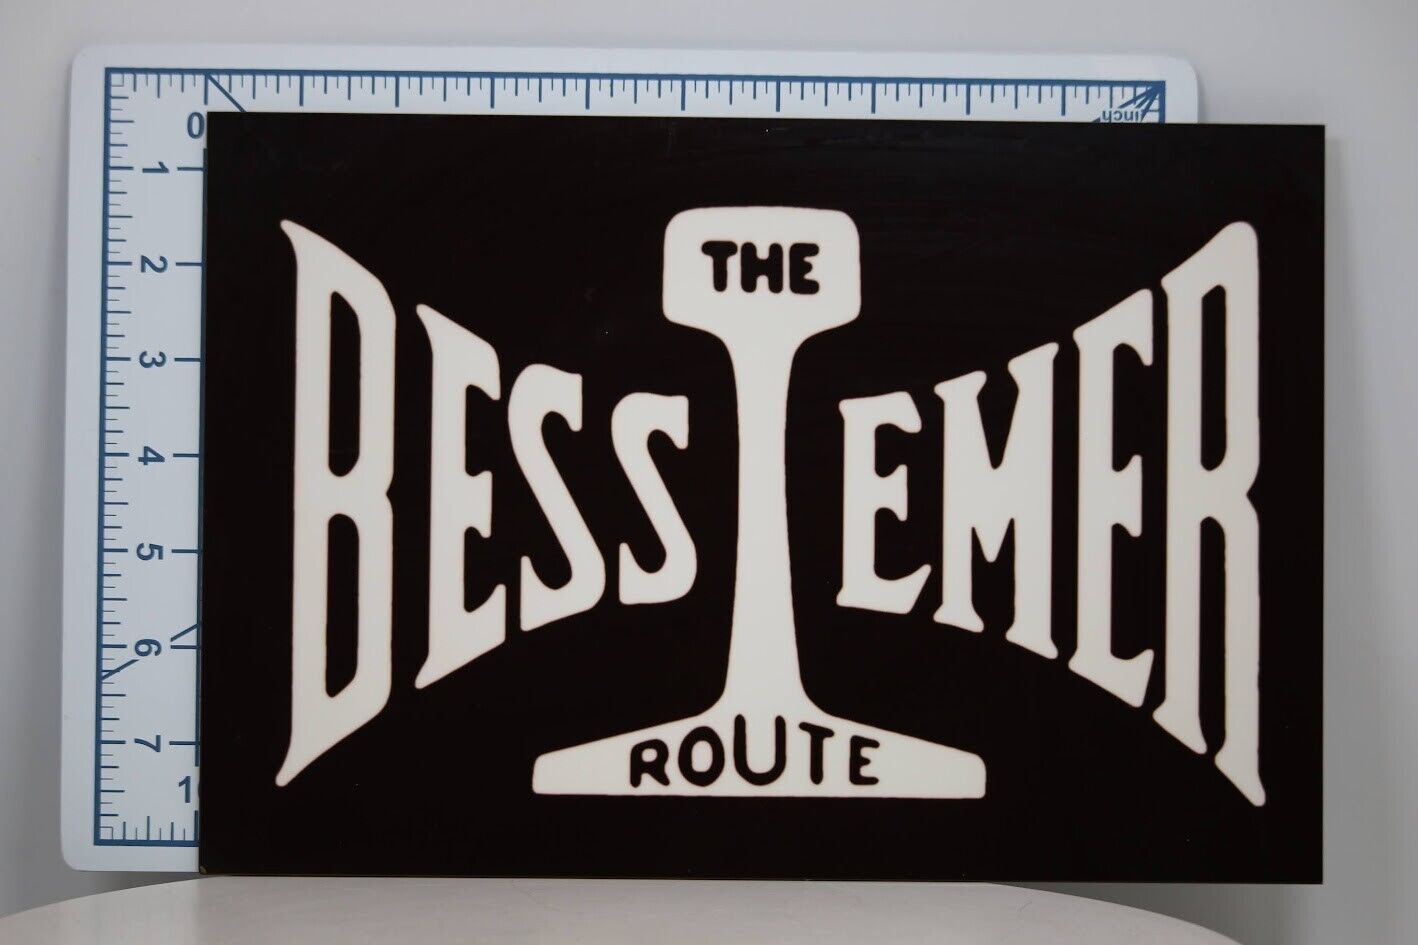 THE BESSEMER ROUTE SQUARE SIGN